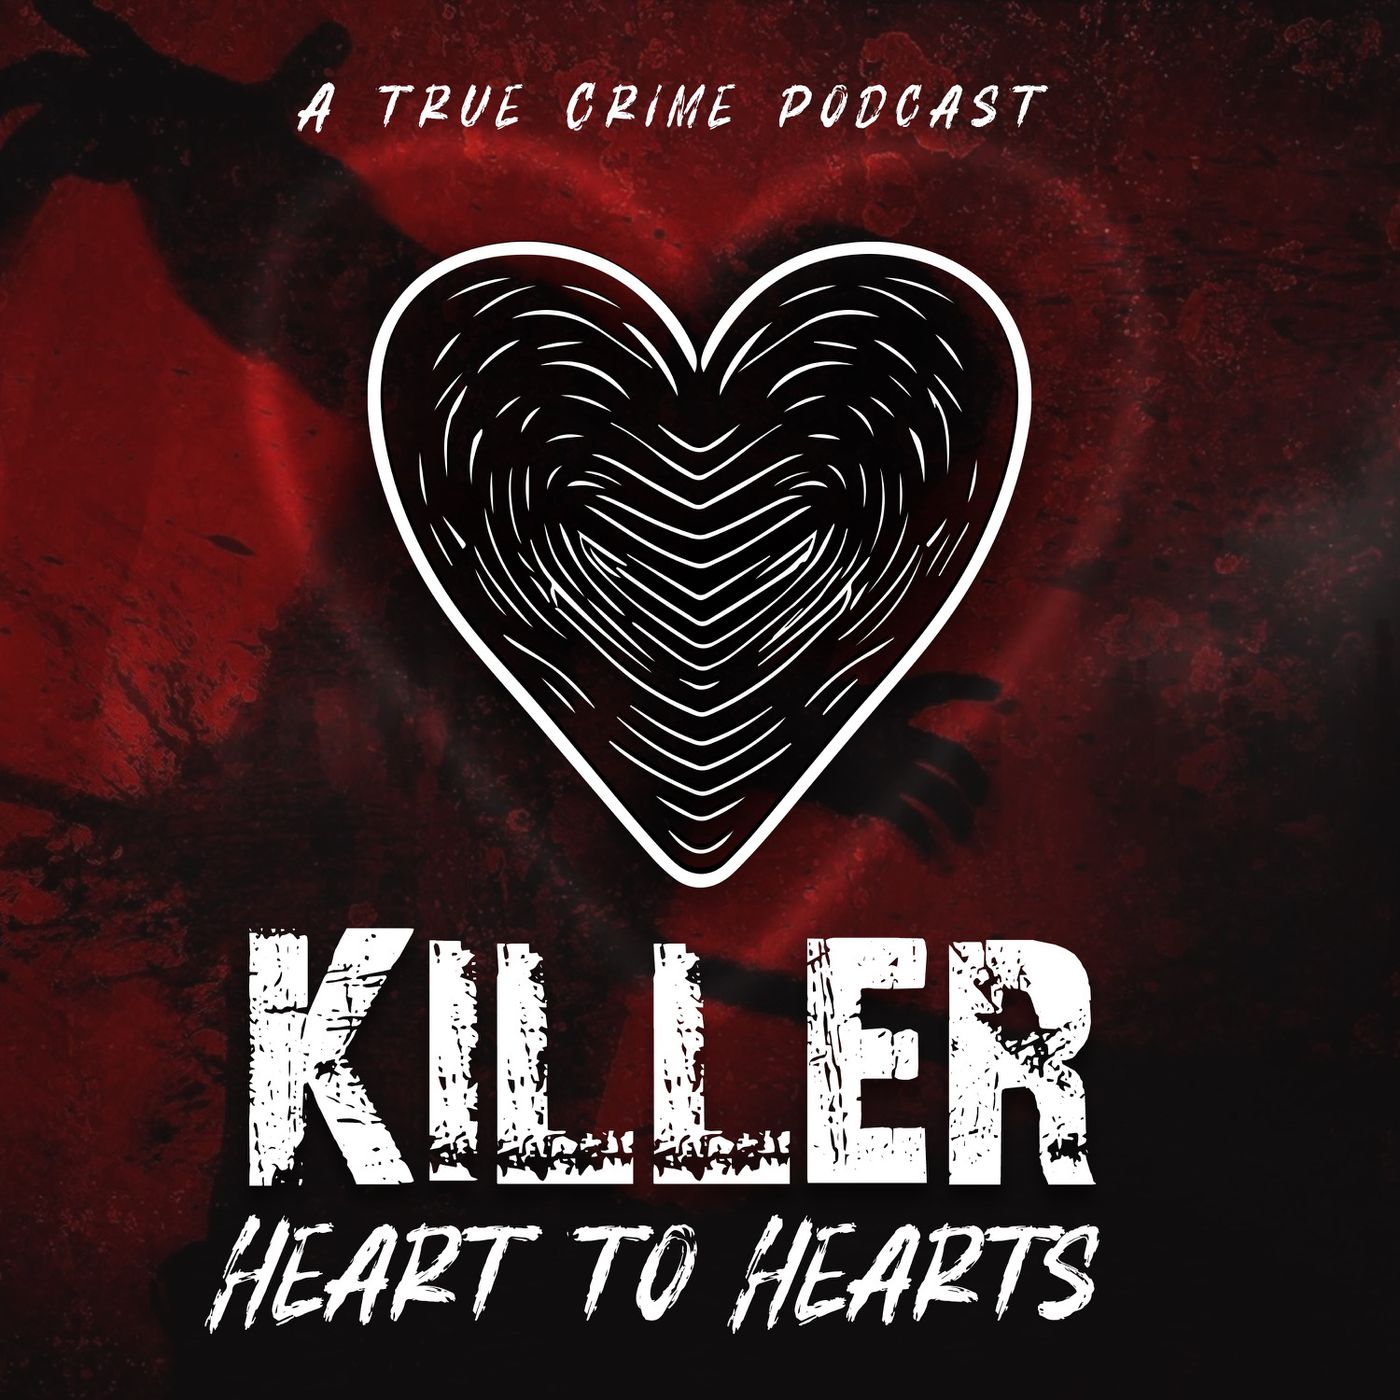 The Murder of Gary Lauwers by Killer Heart to Hearts